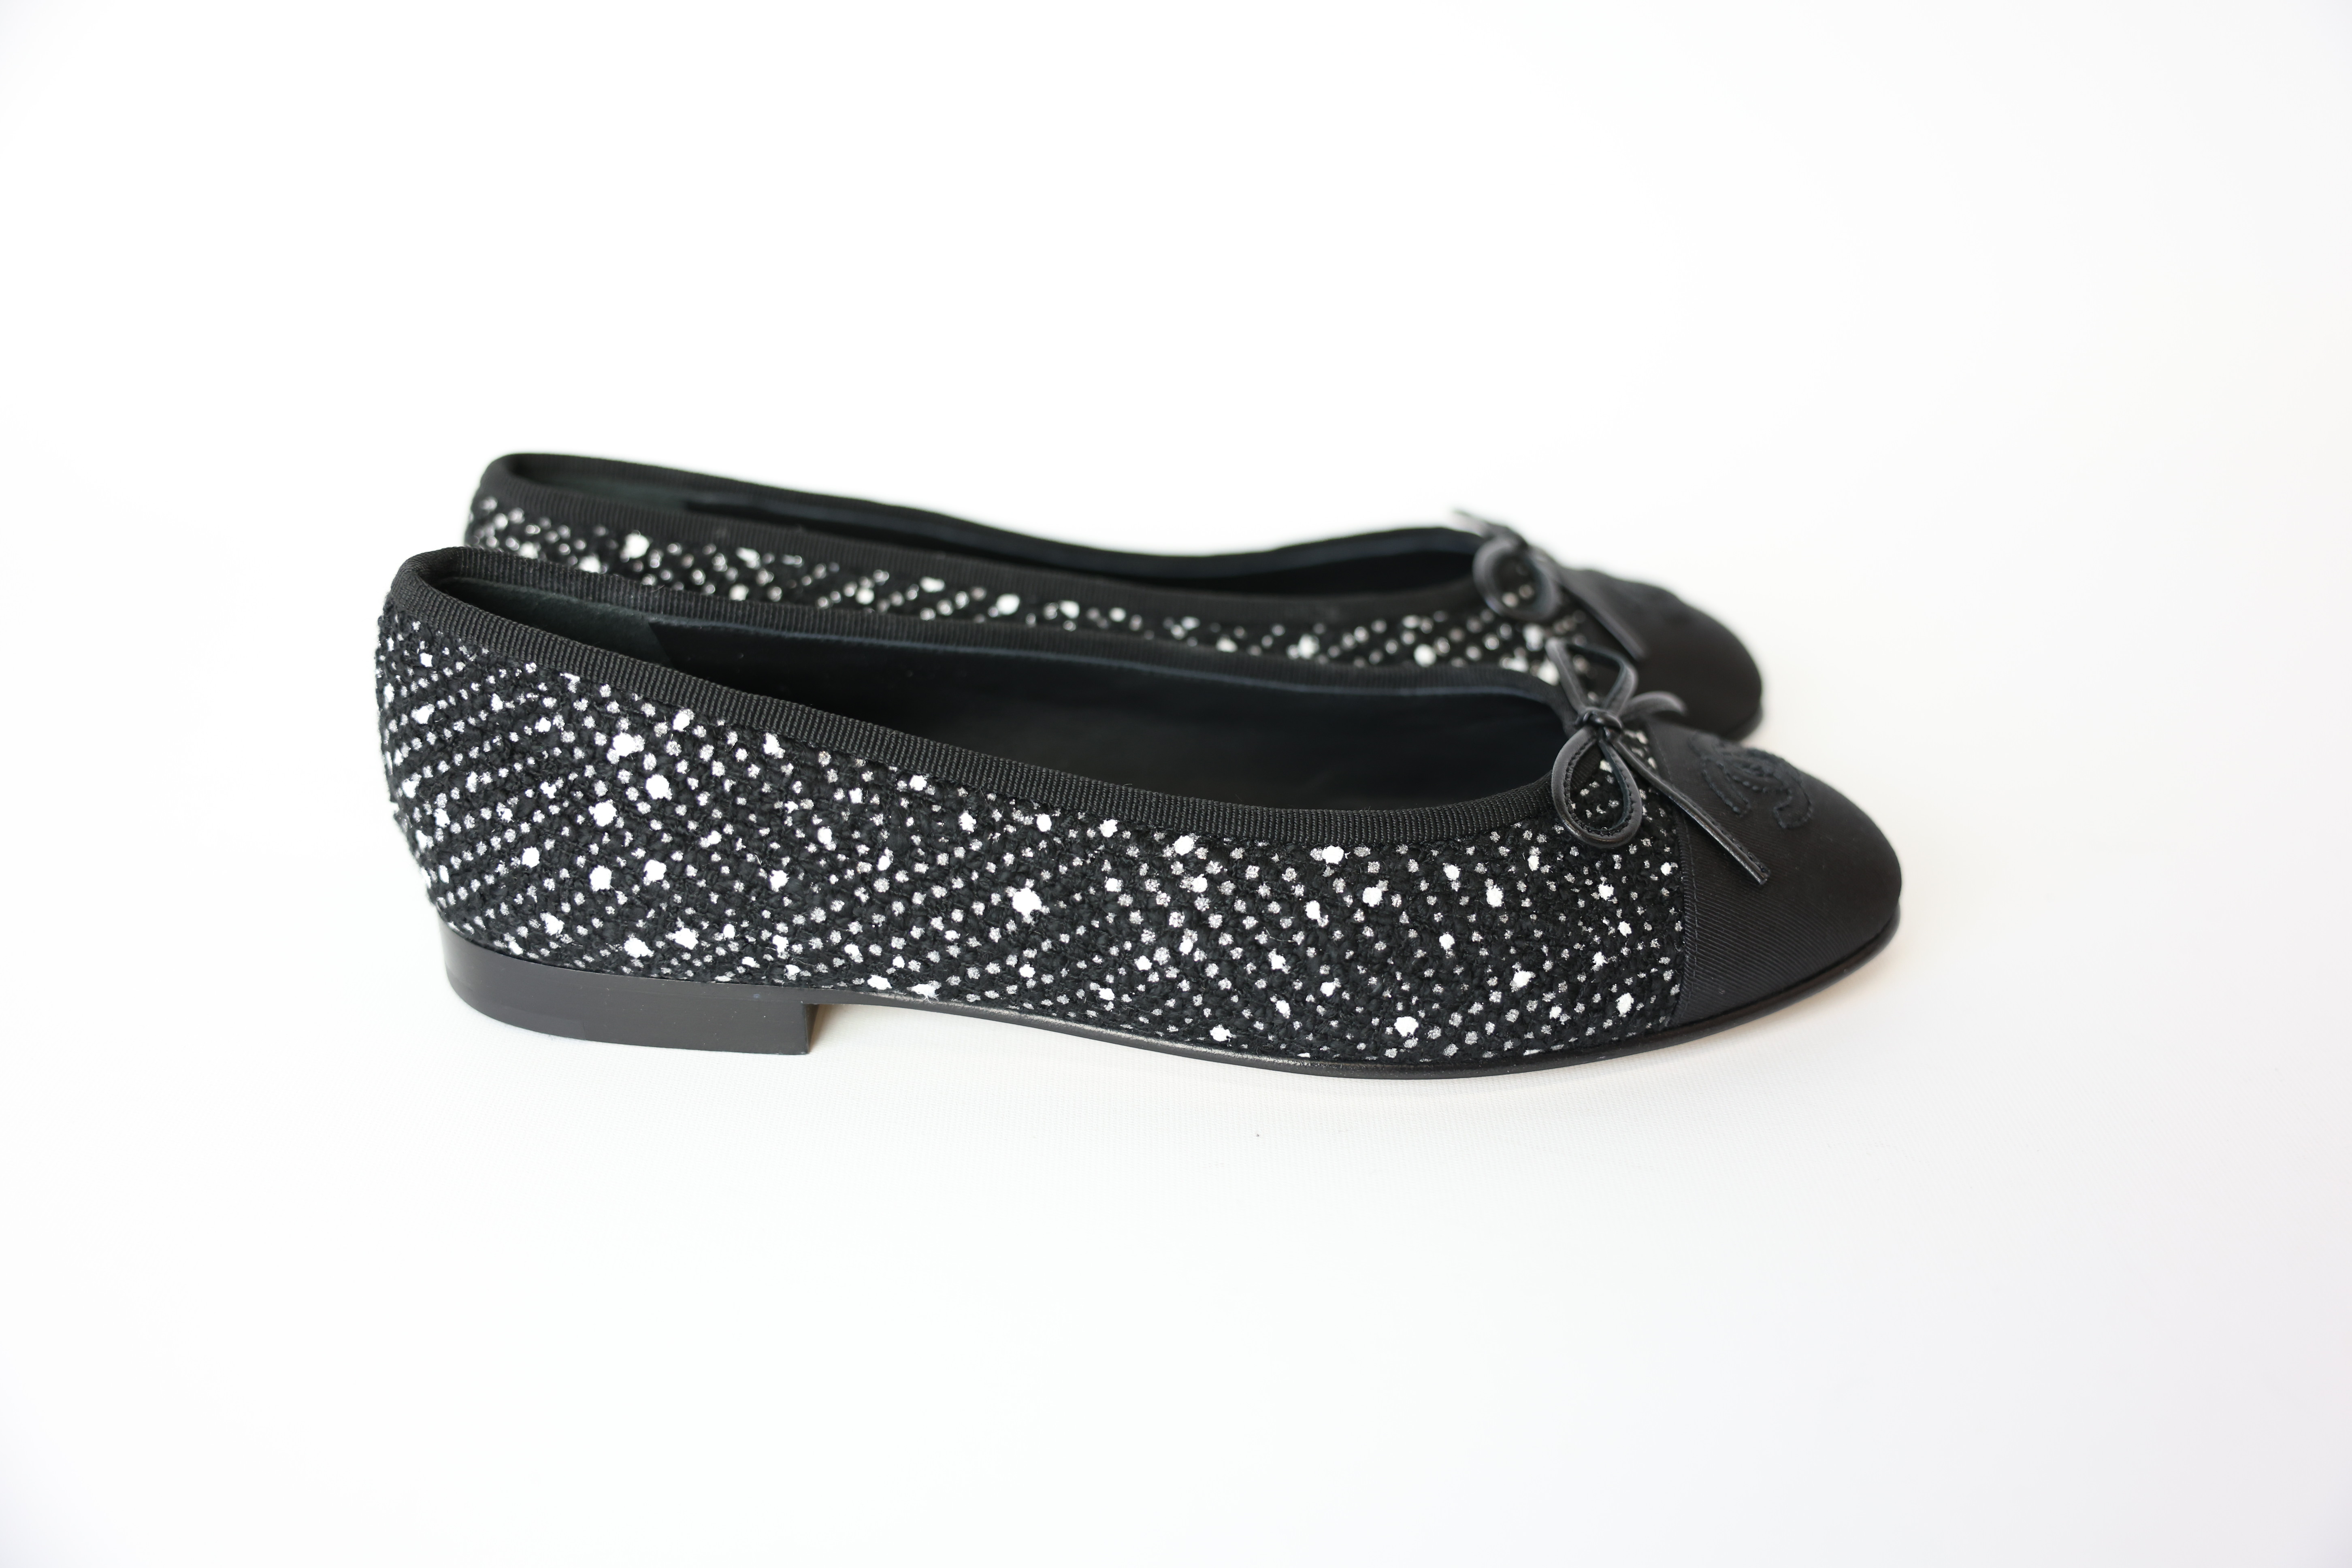 Chanel Ballet Flats, Black and White Tweed, Size 38.5, New in Box WA001 -  Julia Rose Boston